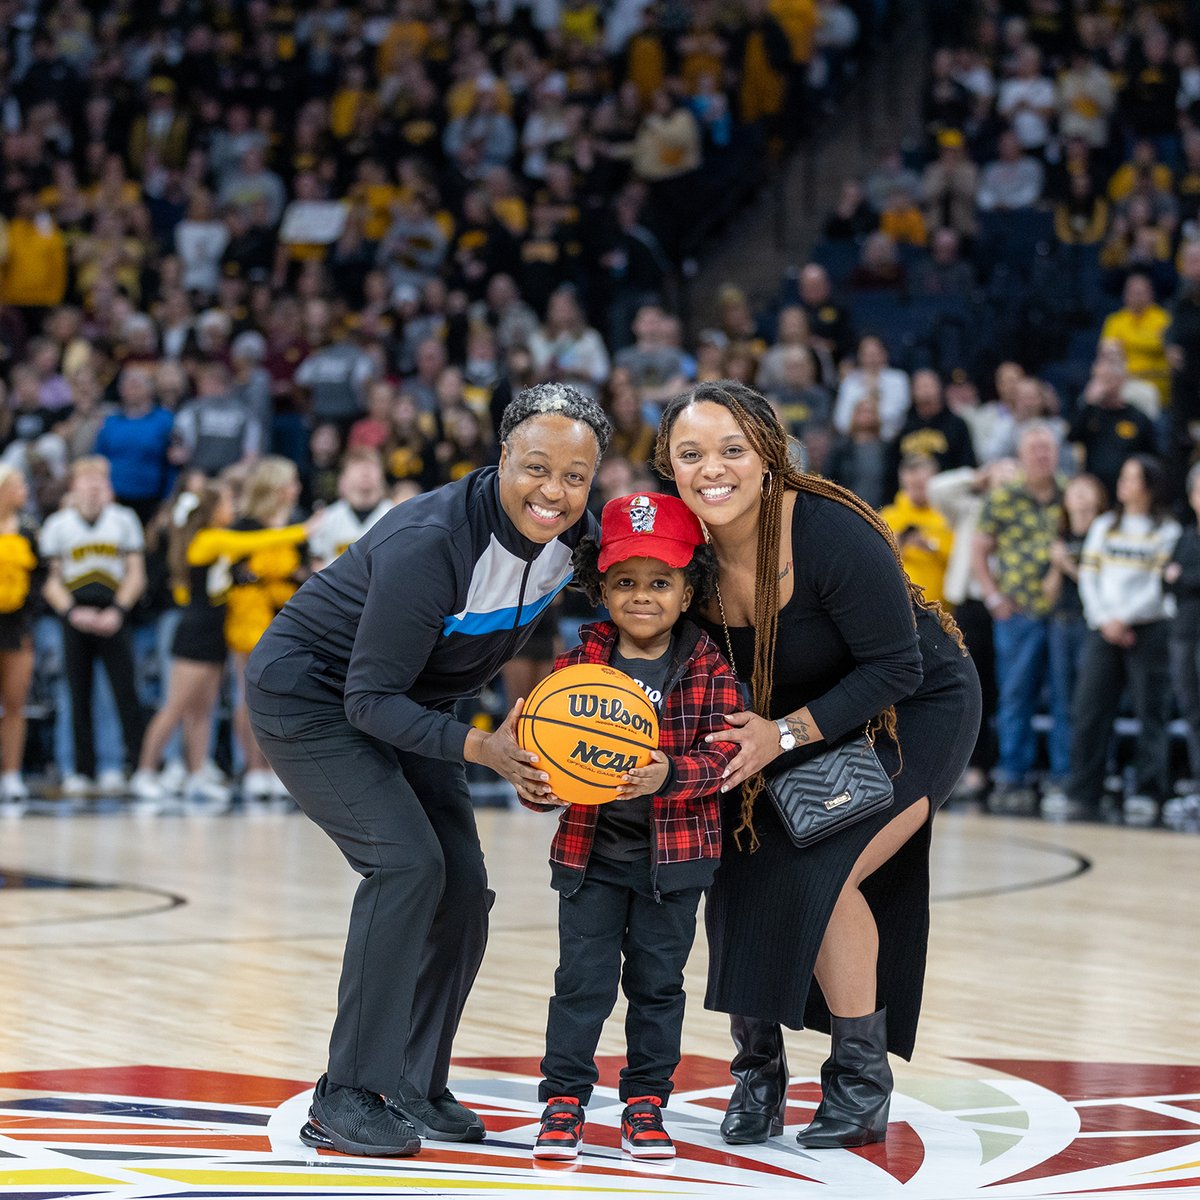 Two of our kid's health champions had a 'suite' experience during the @bigten basketball tournaments in March! Kiro Lenear and Mackenzie Wynegar served as honorary Tip-Off Kids during the championship games, presenting the game balls while sharing their inspiring stories! 🏀